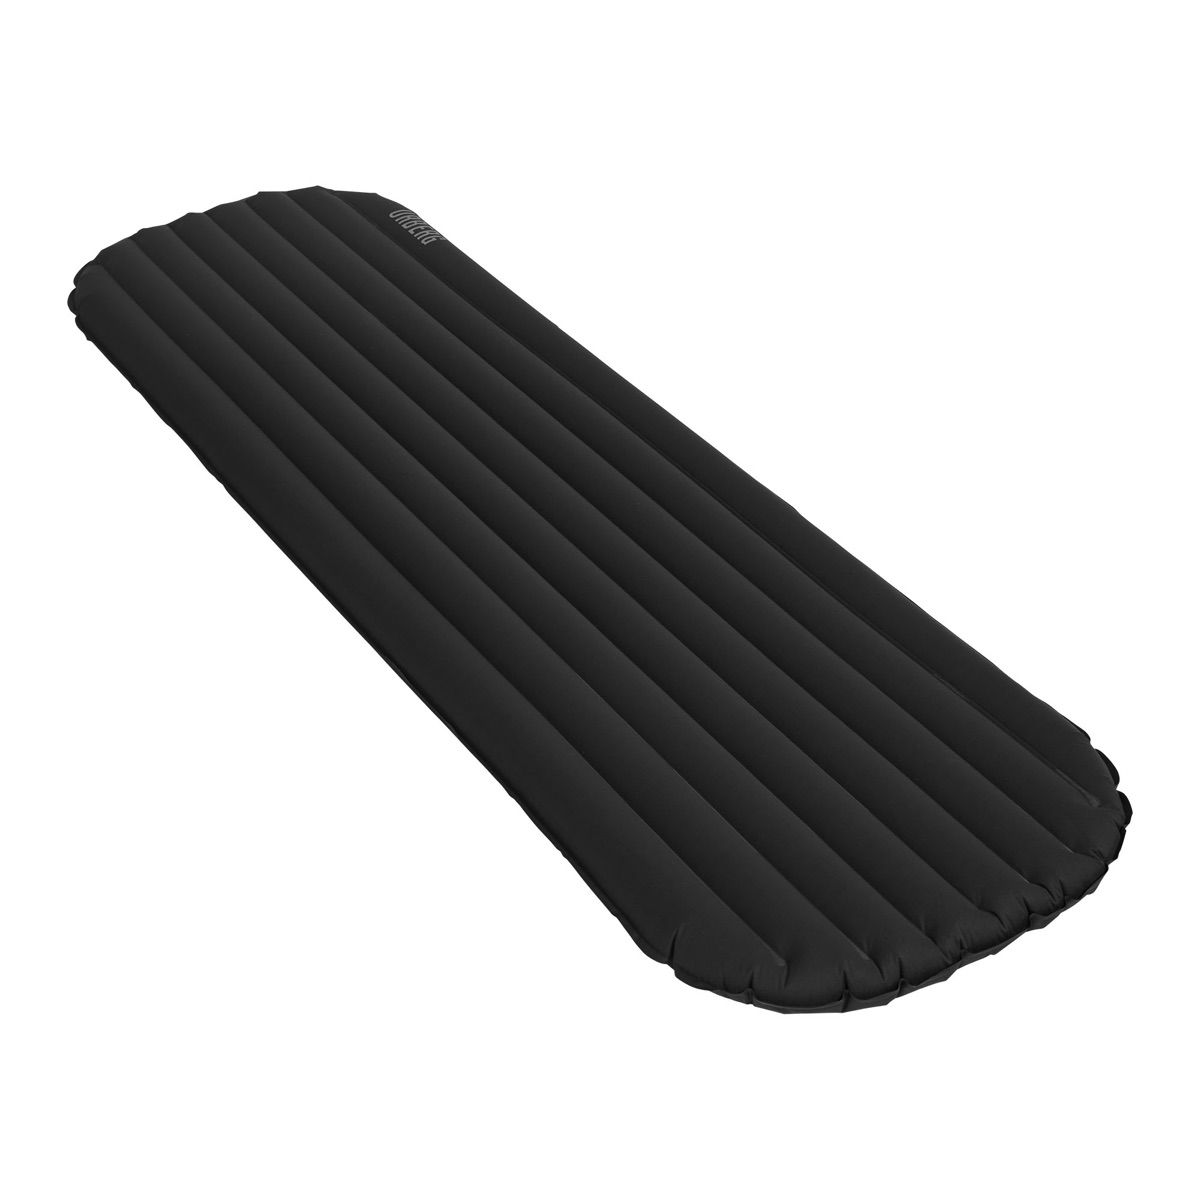 Urberg Insulated Airmat Vertical Channels Jet Black